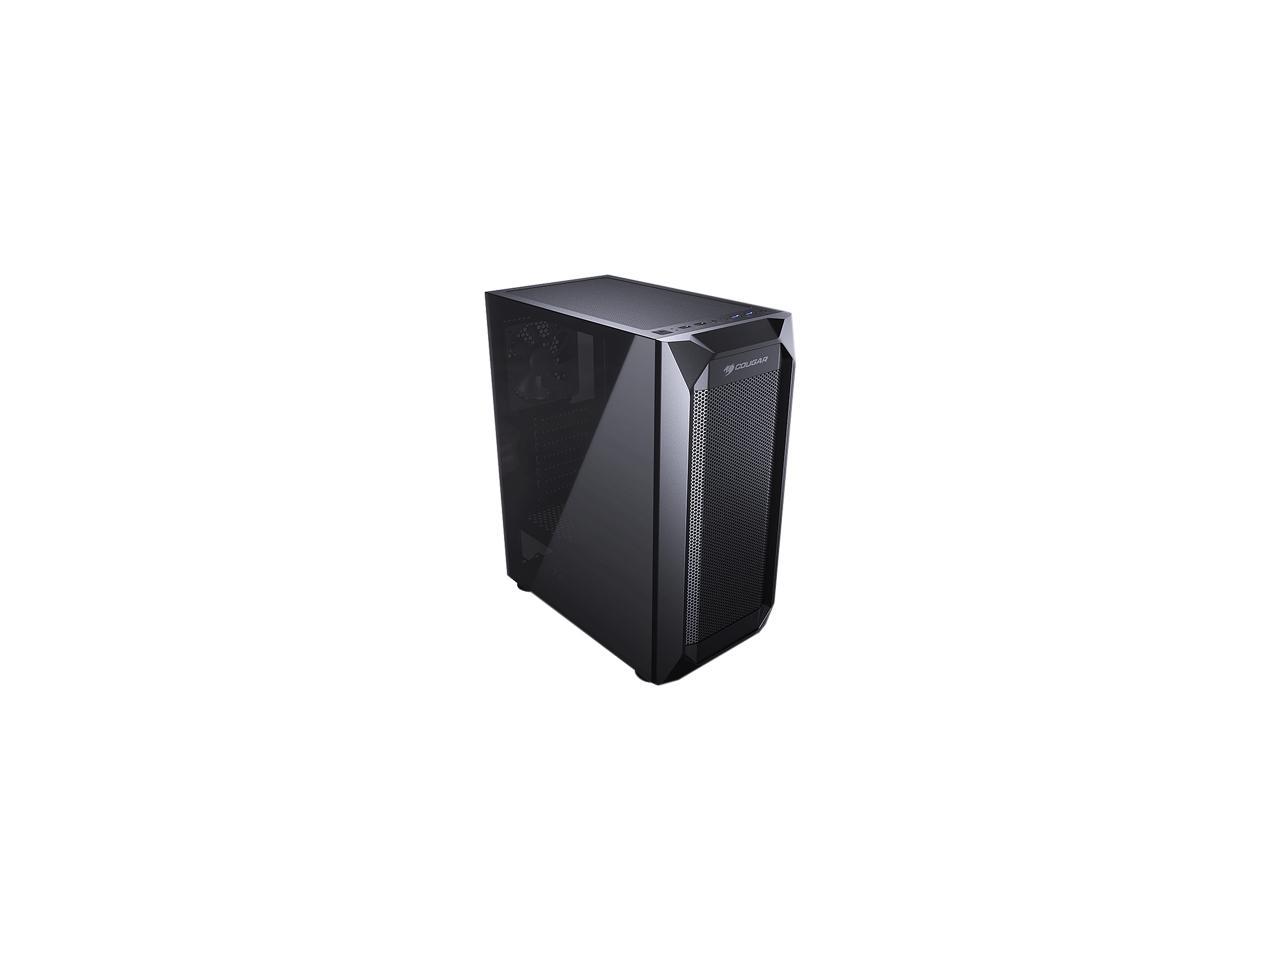 COUGAR MX410 Mesh-G Black Powerful and Compact Mid-Tower Case with Mesh Front Panel and Tempered Glass